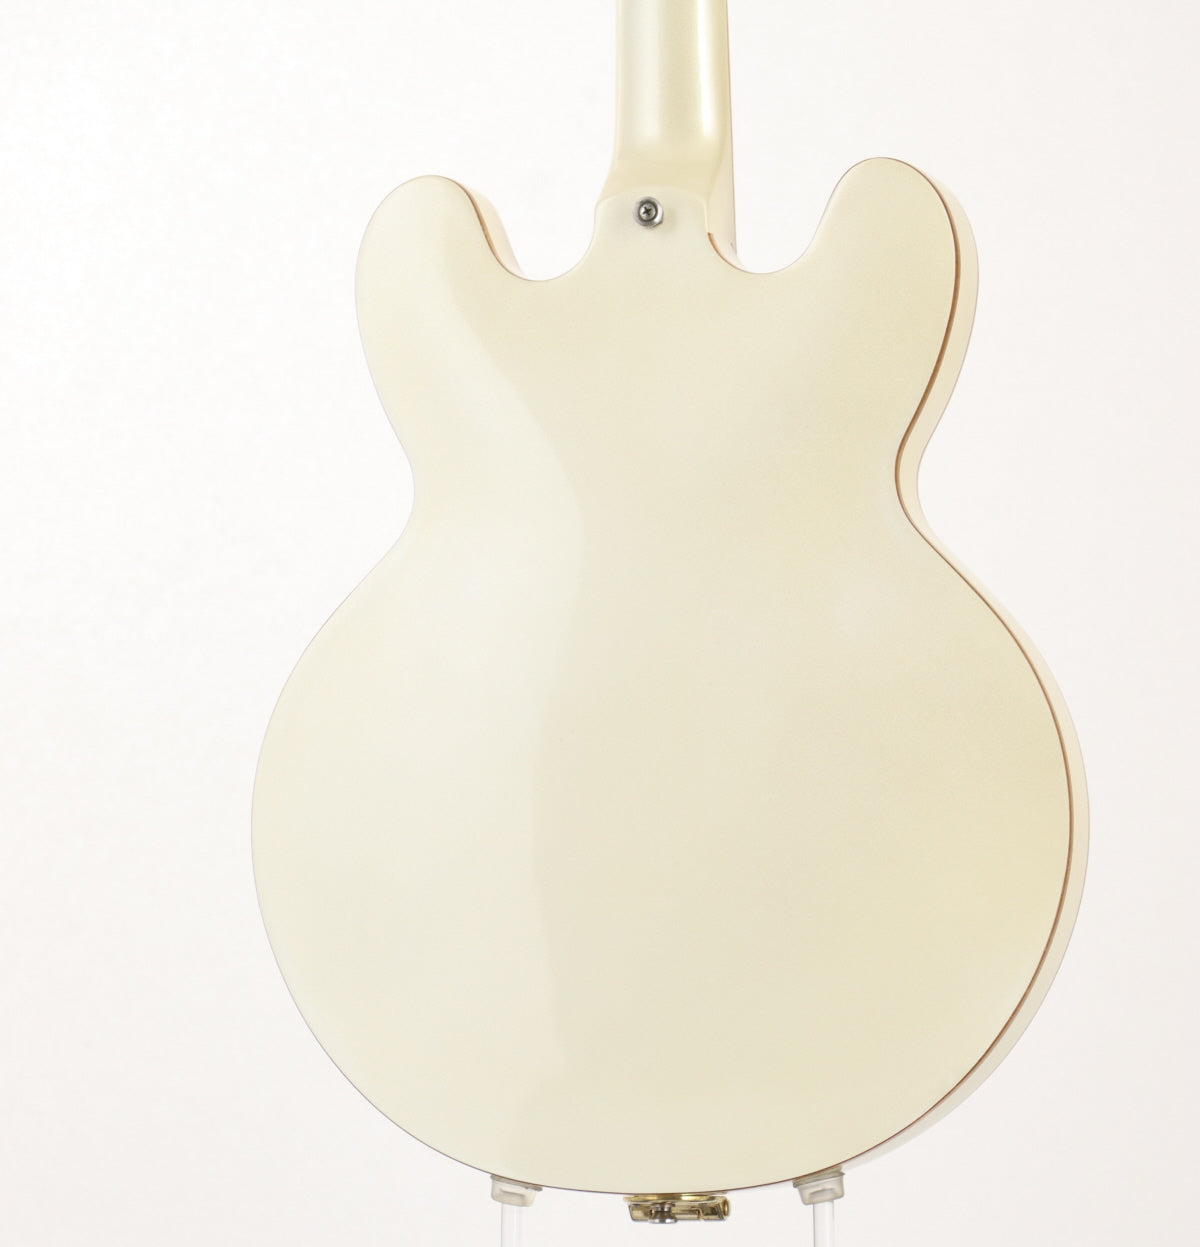 [SN 11061501690] USED Epiphone / Limited Riviera Custom P93 Royale White Pearl 2011 [09]